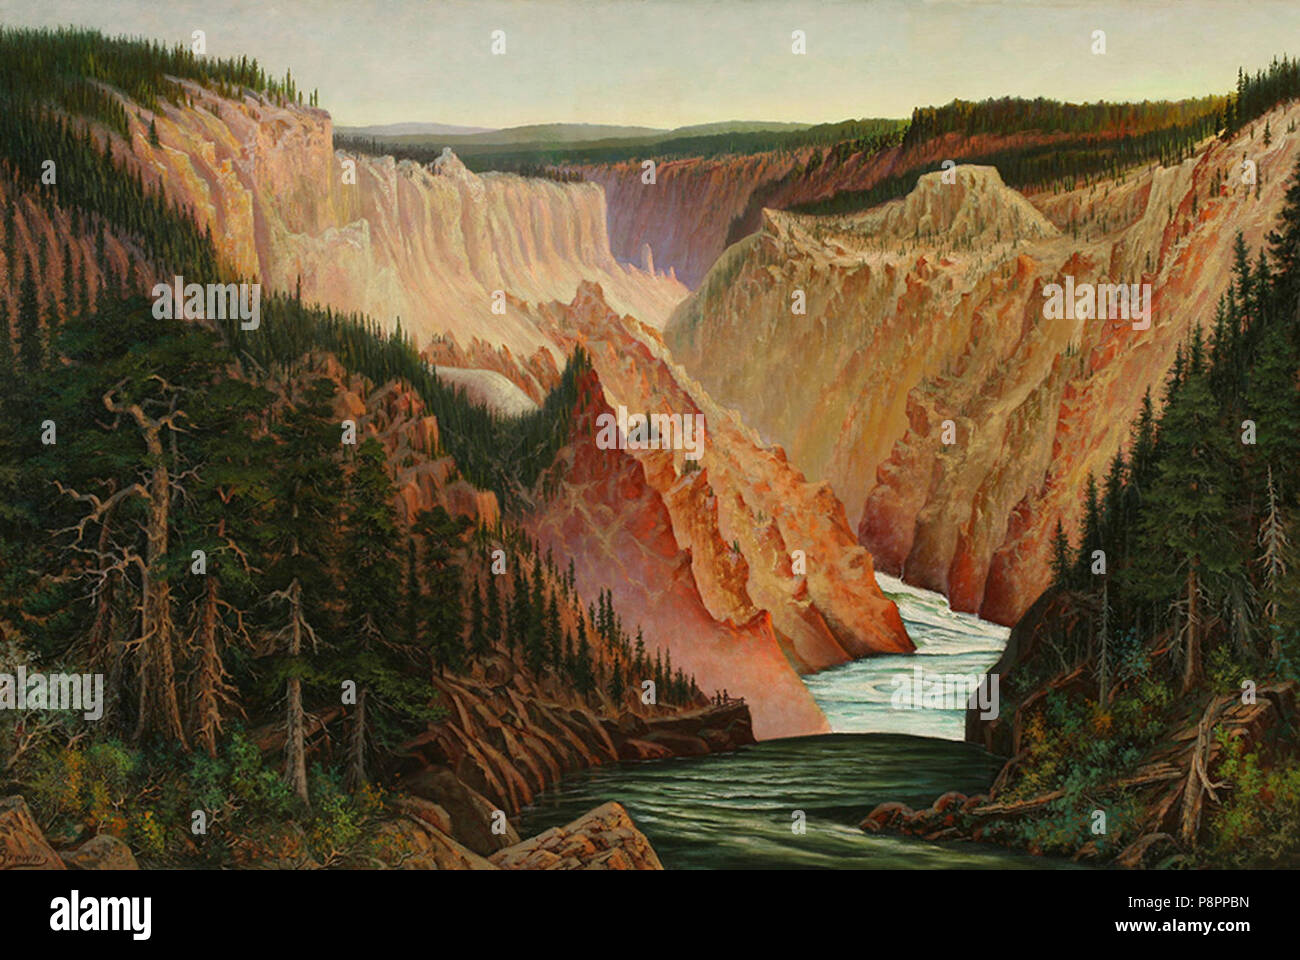 A Canyon River with Pines and Figures (Yellowstone) by Grafton Tyler Brown. Stock Photo